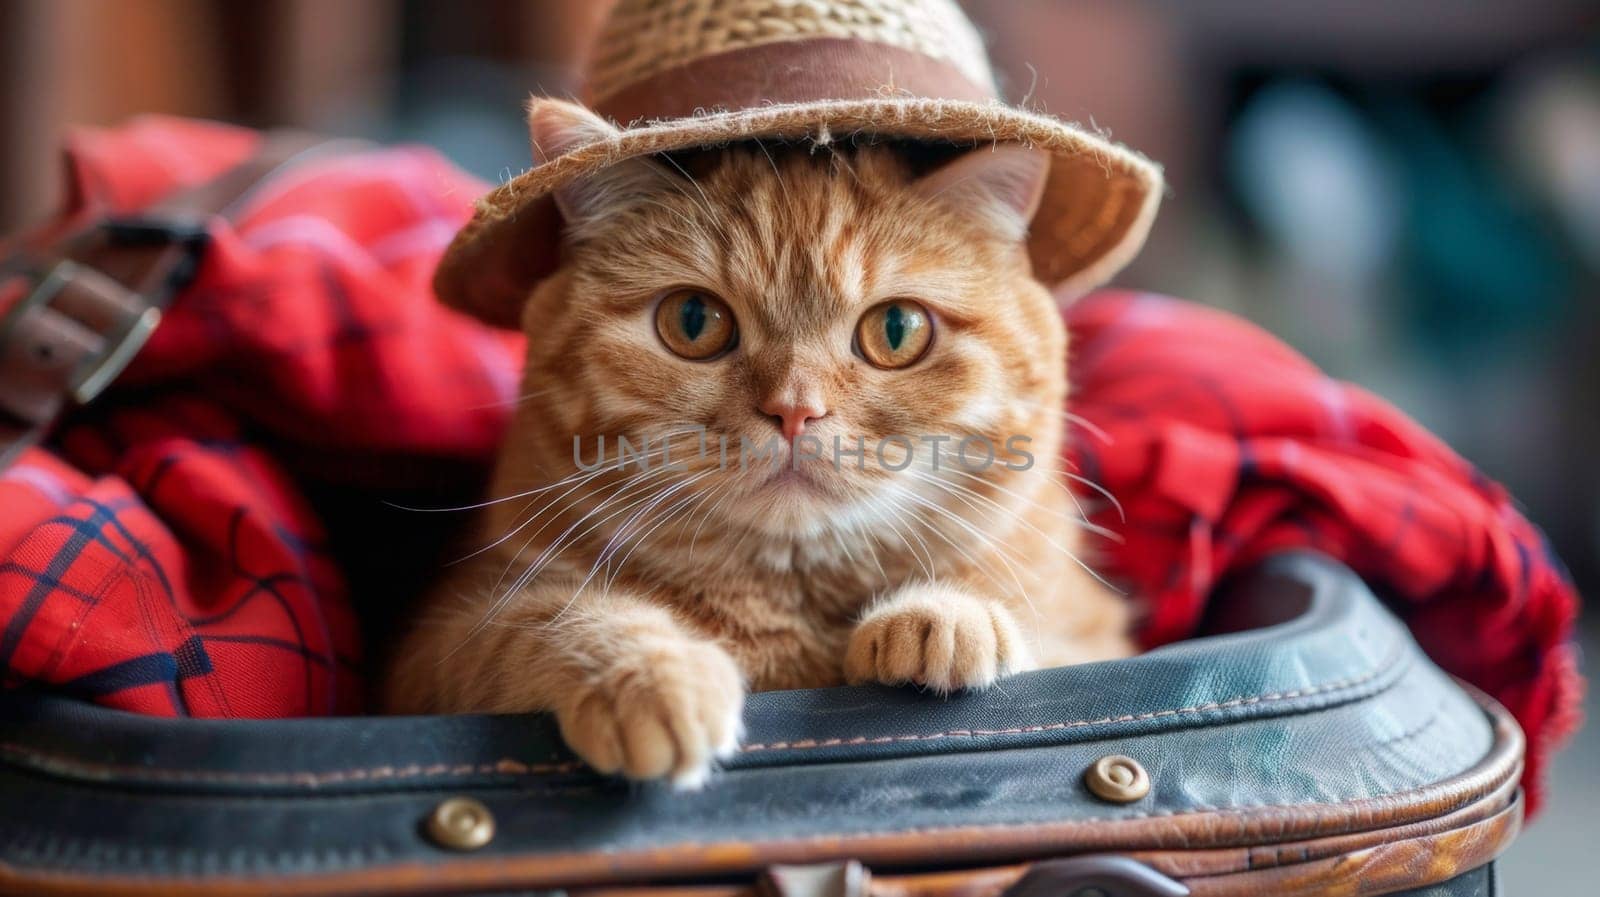 A cat wearing a straw hat sitting in an open suitcase